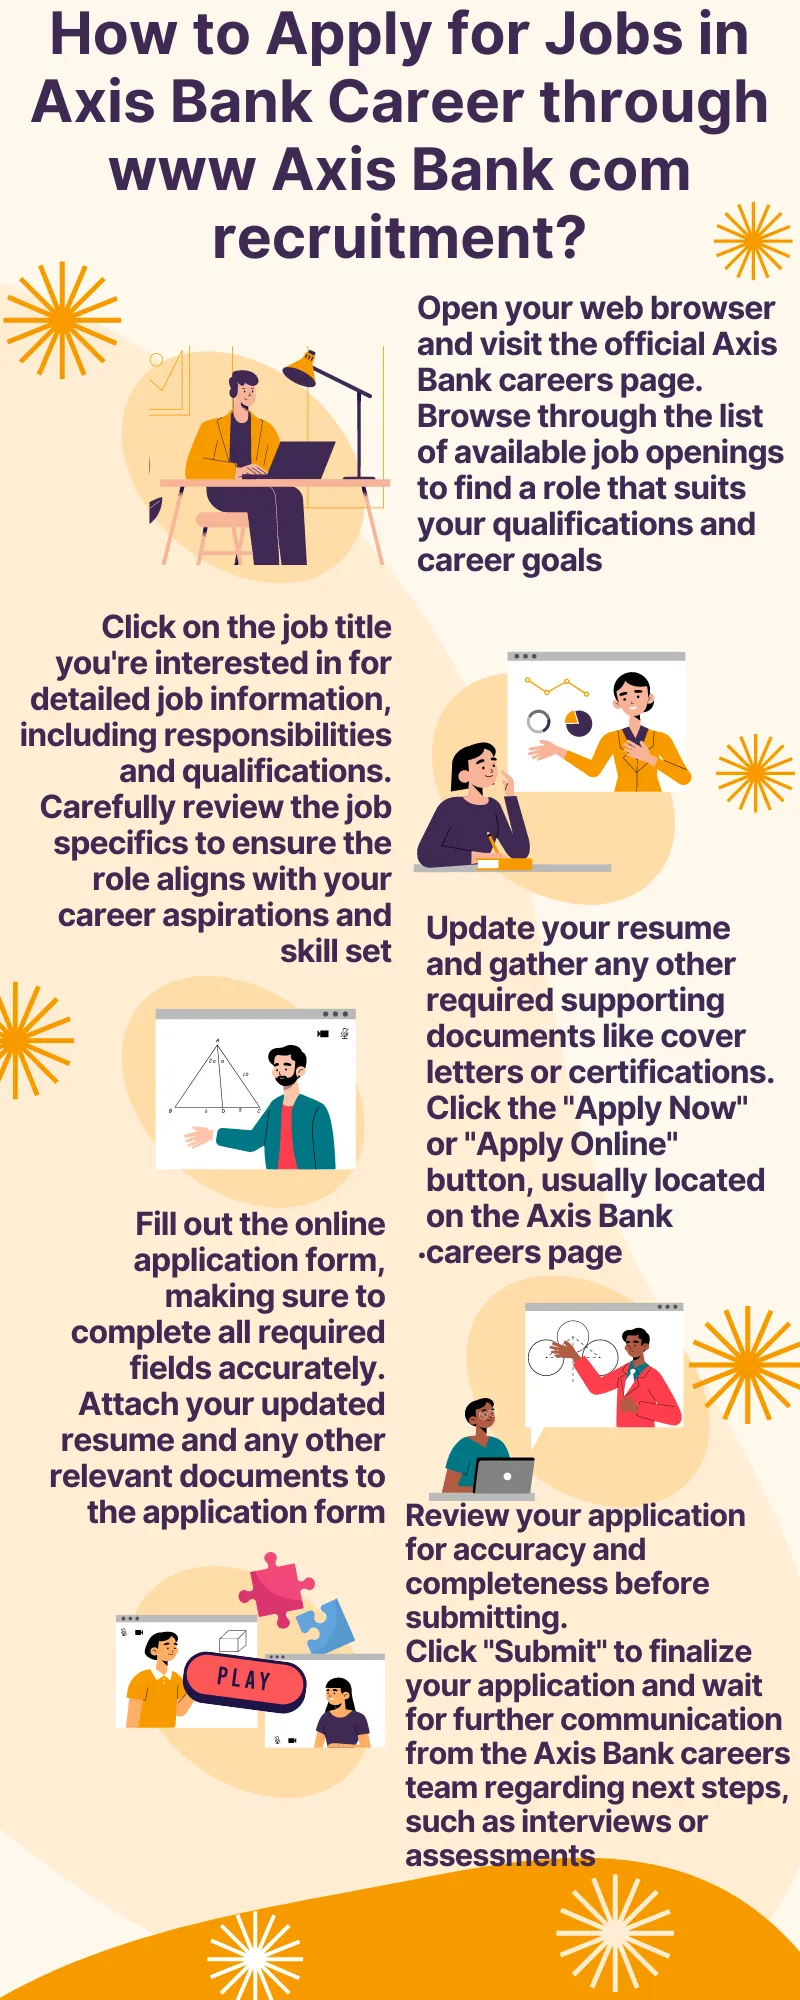 How to Apply for Jobs in Axis Bank Career through www Axis Bank com recruitment?